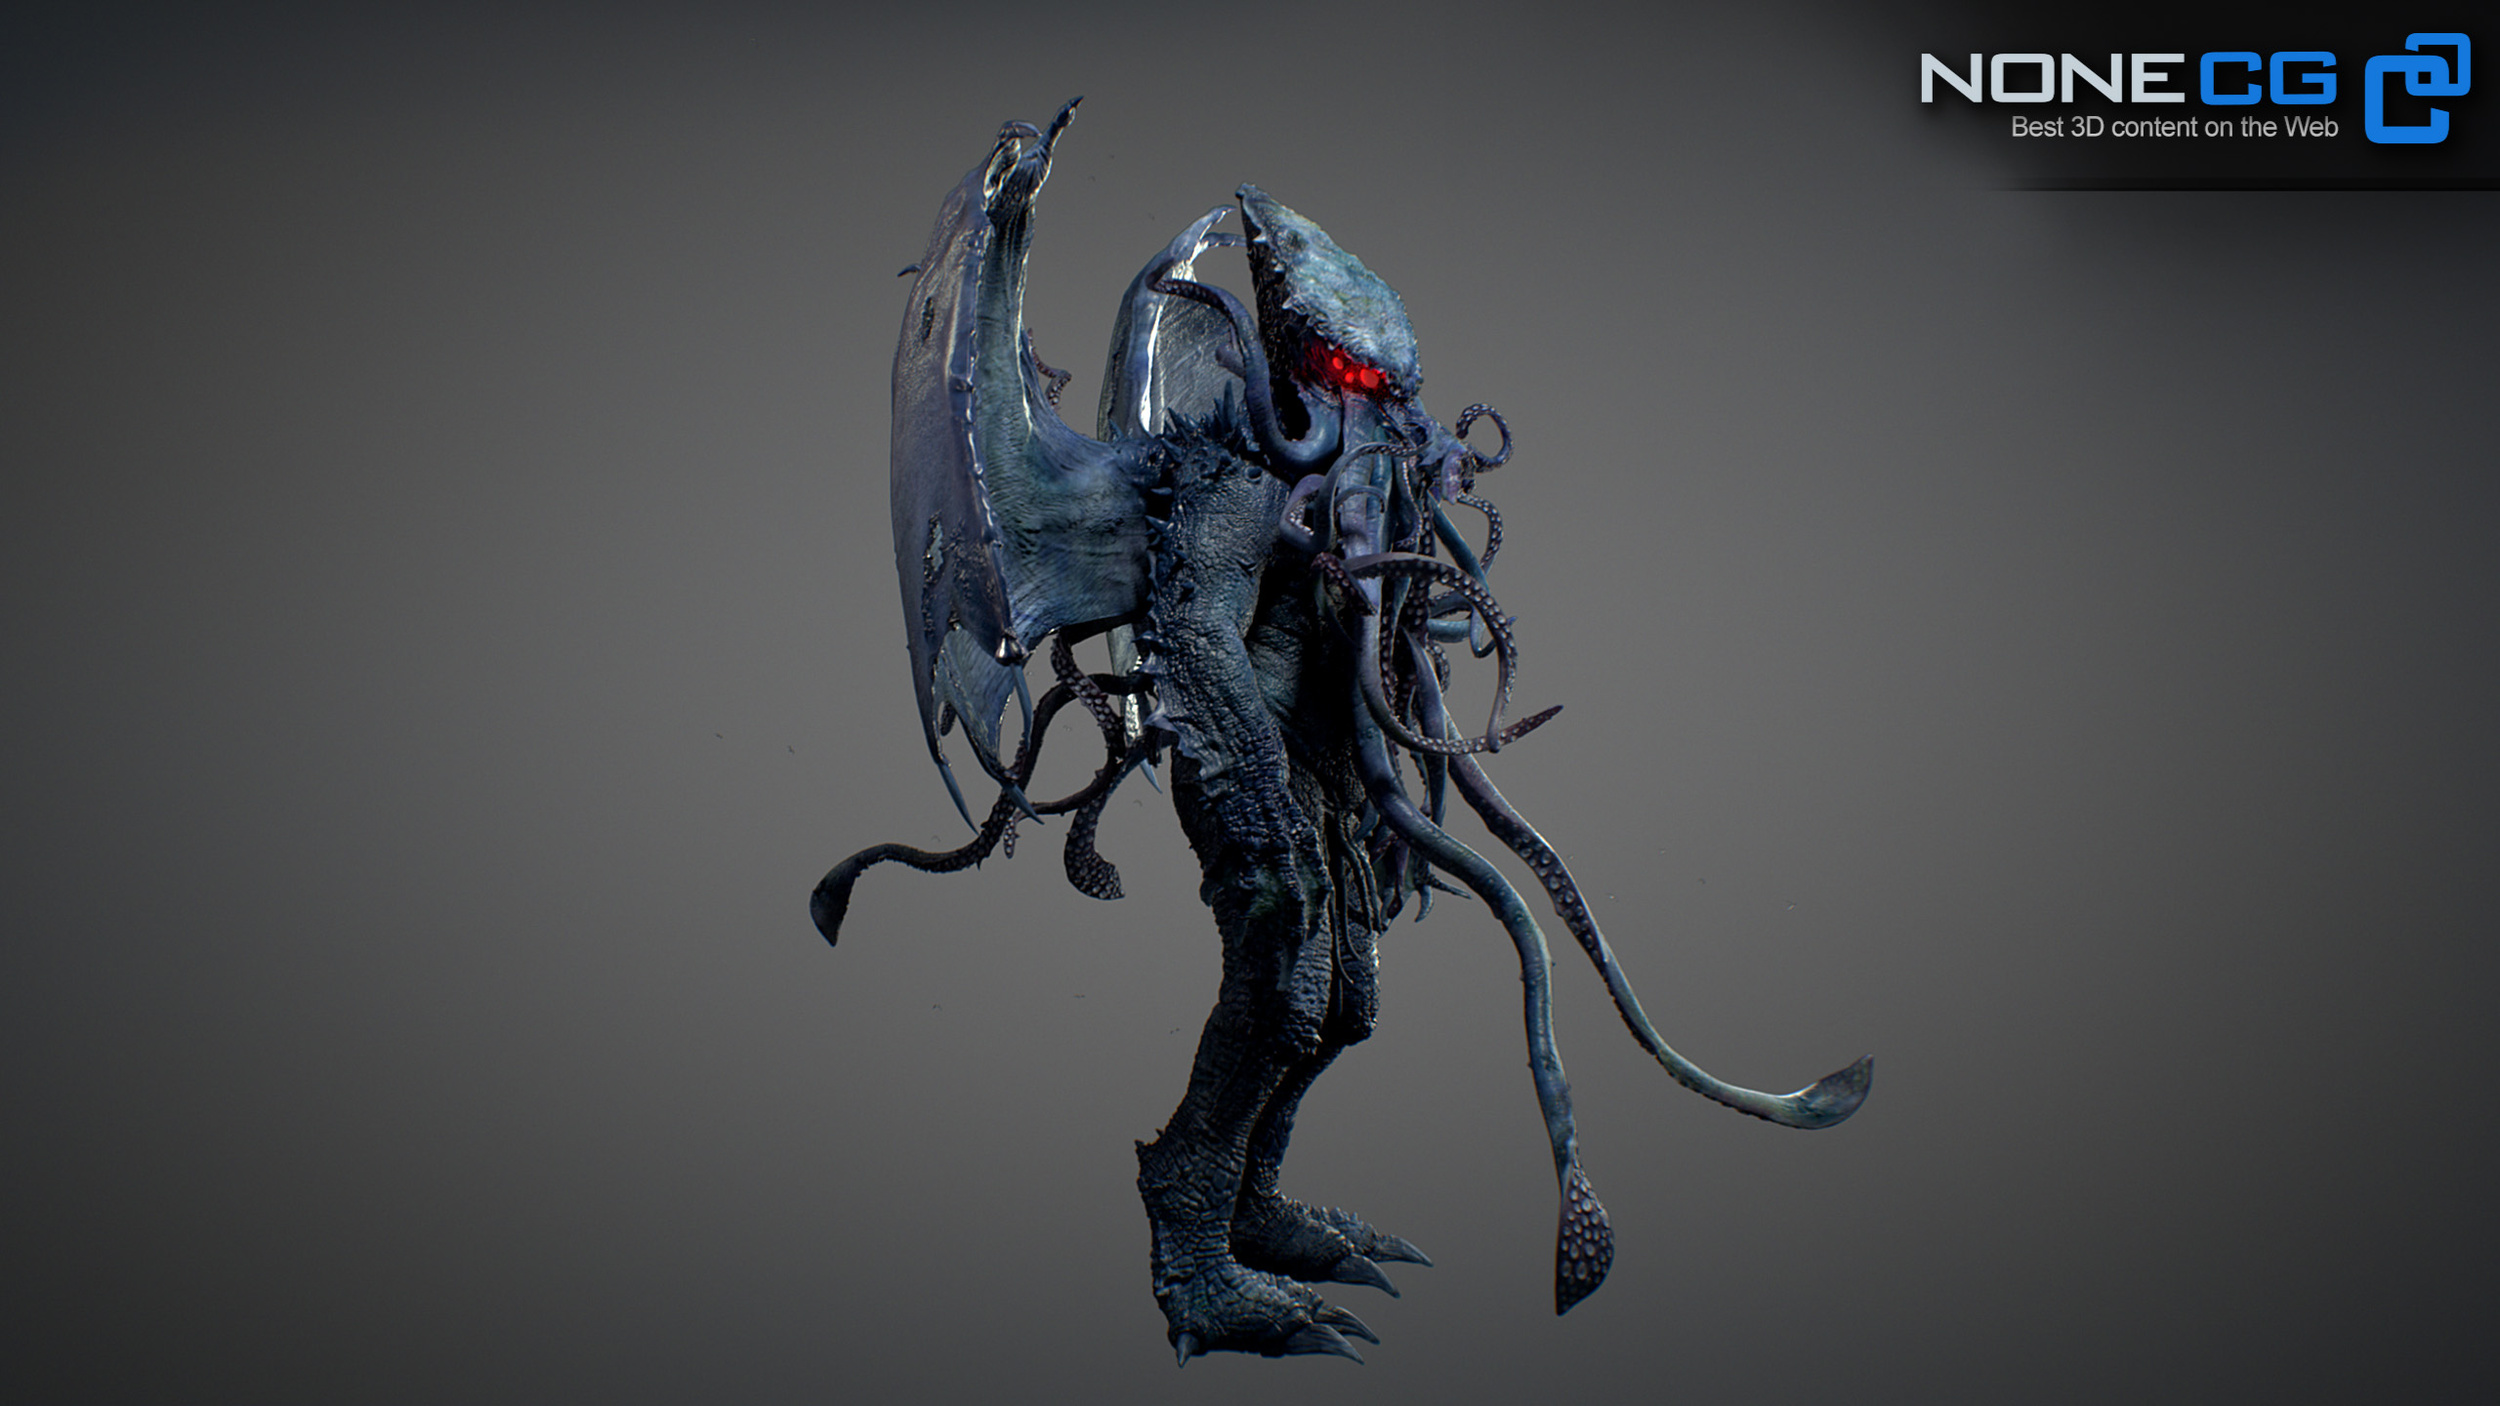 Cthulhu Rigged - 3D Model by NoneCG